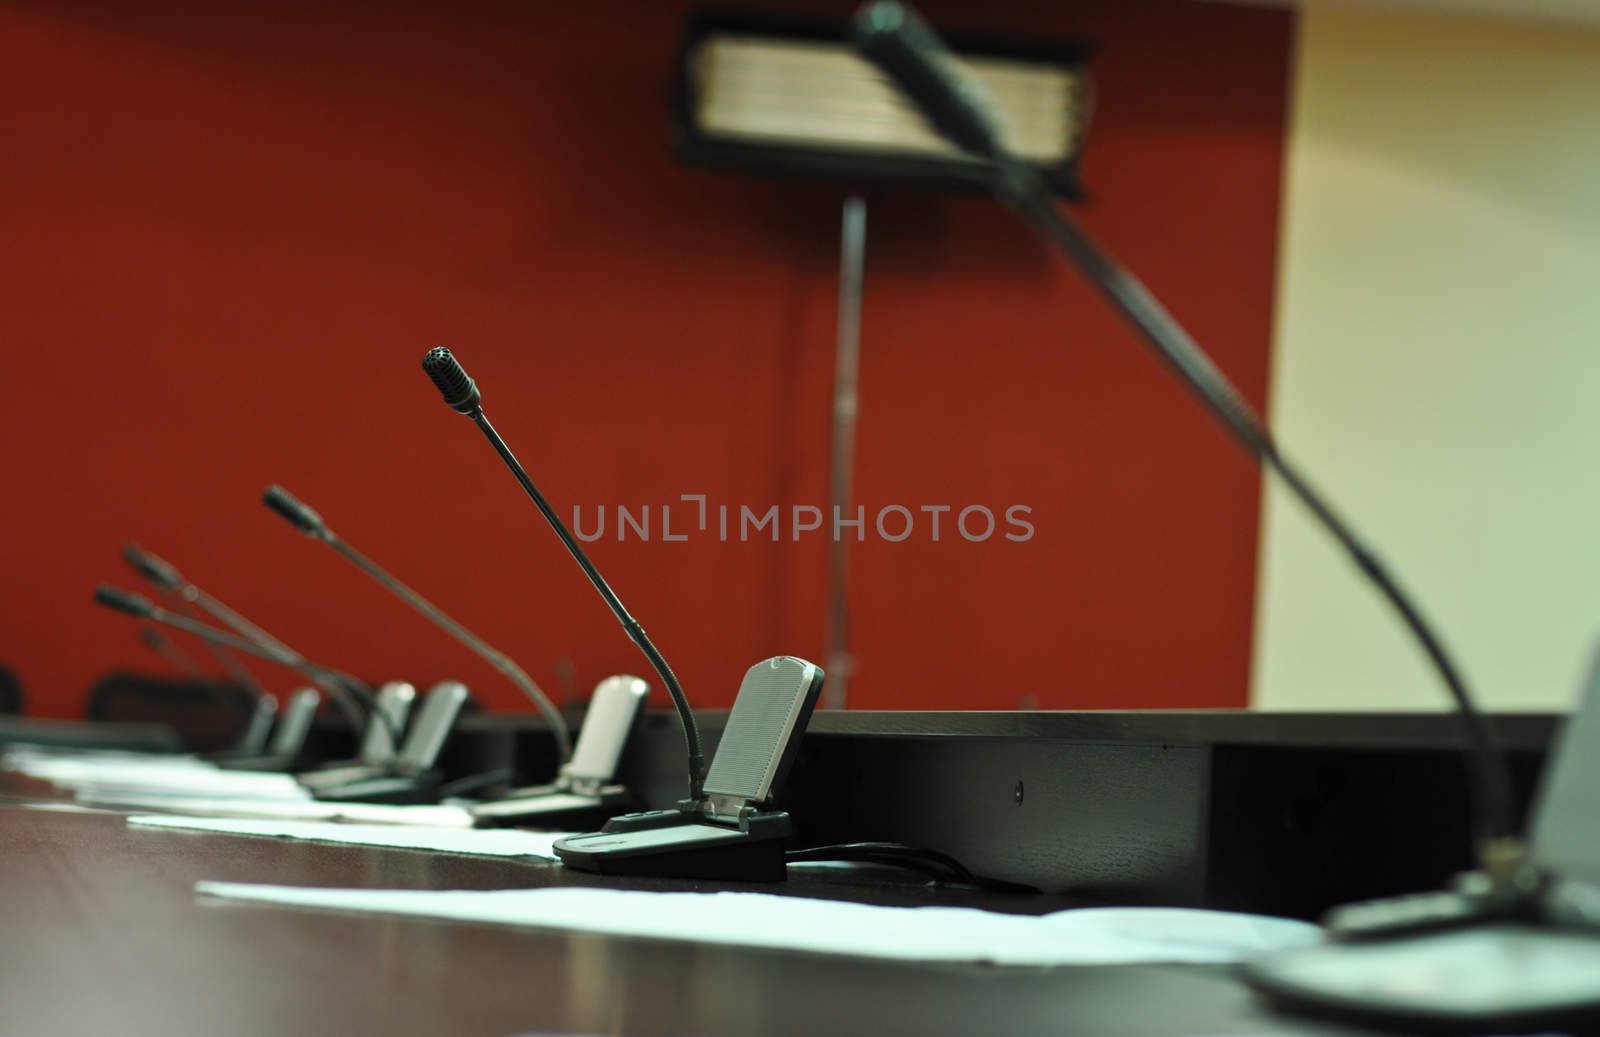 Conference table, microphones close-up